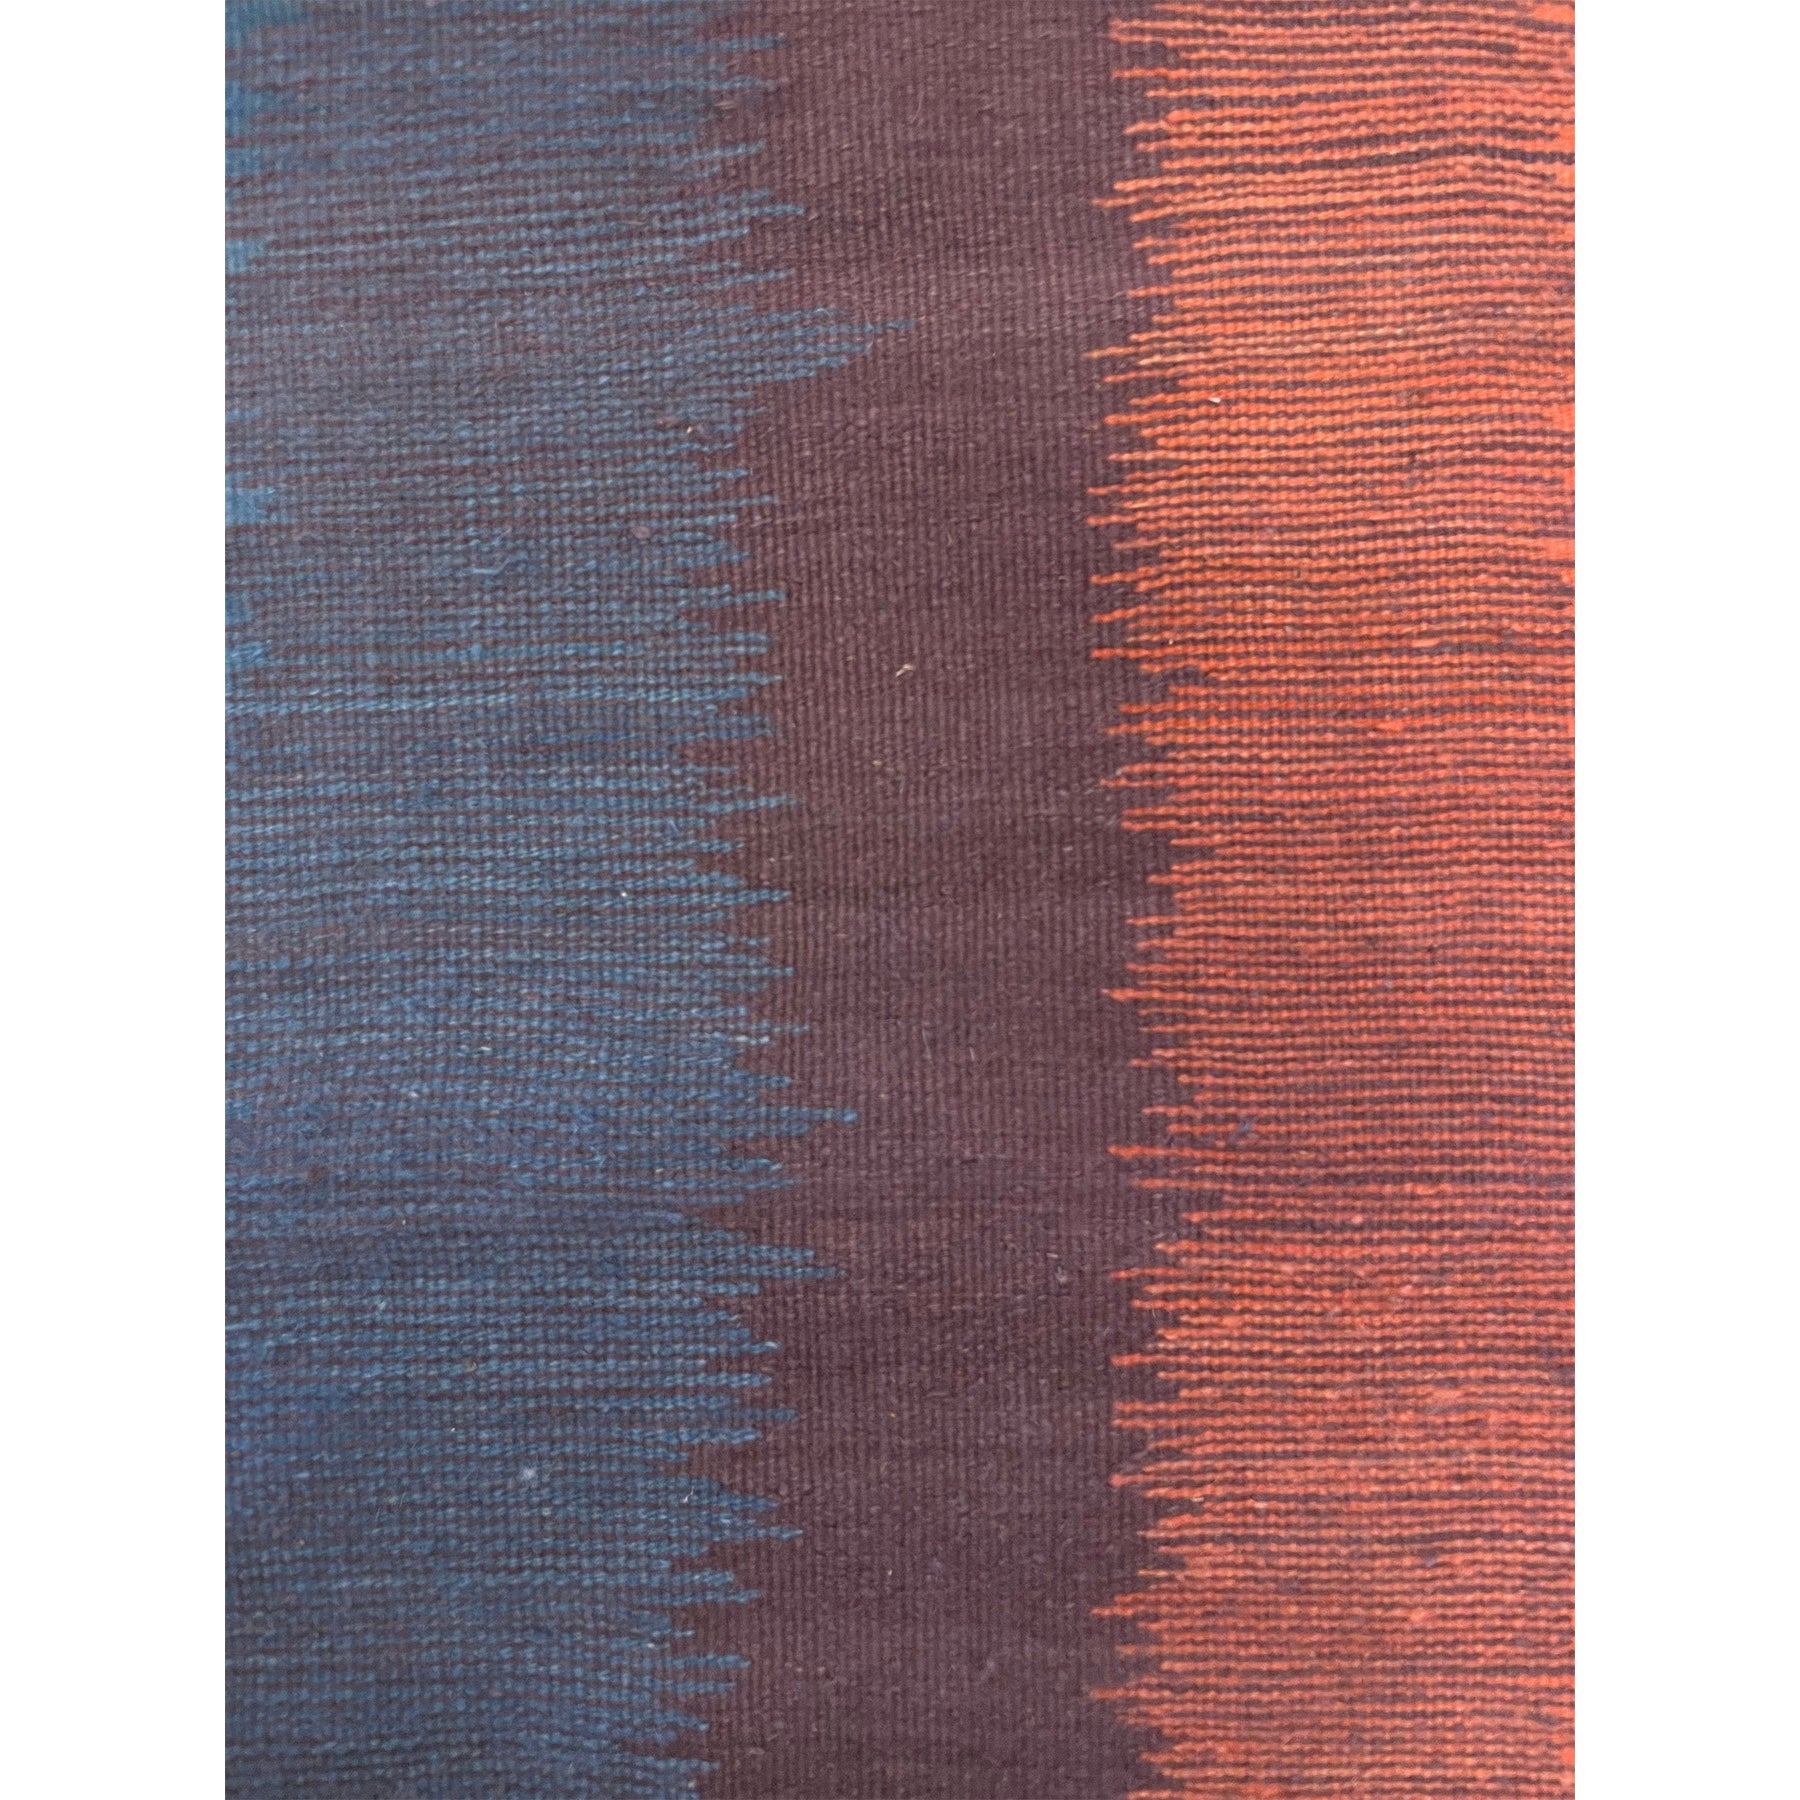 SHAYMA - Modern Moroccan flatweave runner with intersecting colors